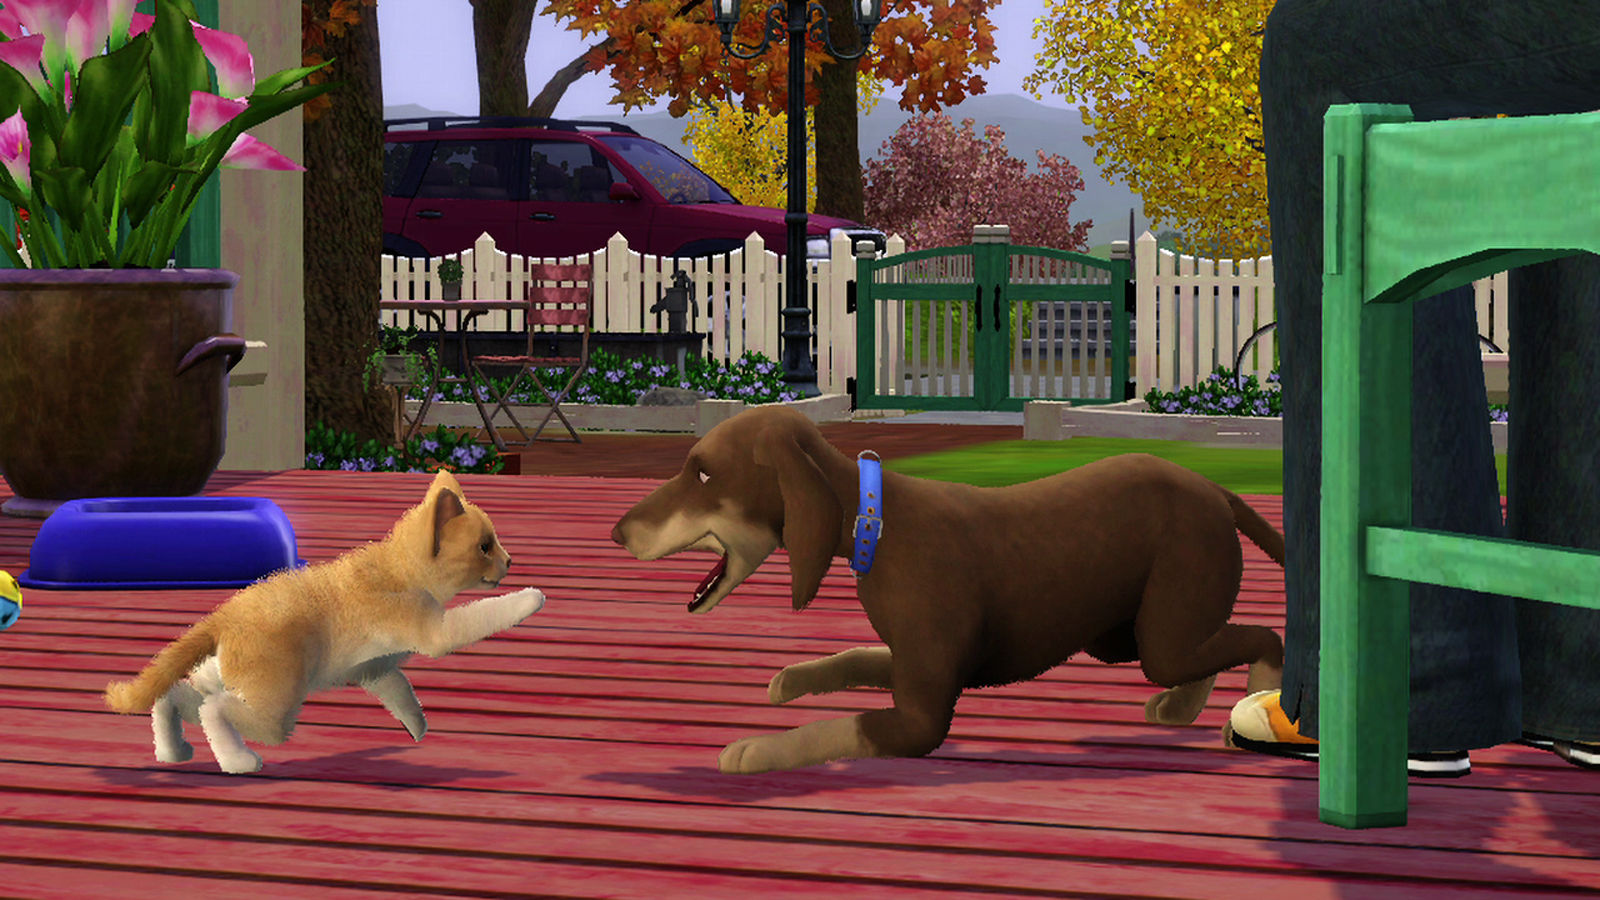 download free sims 3 pets pc